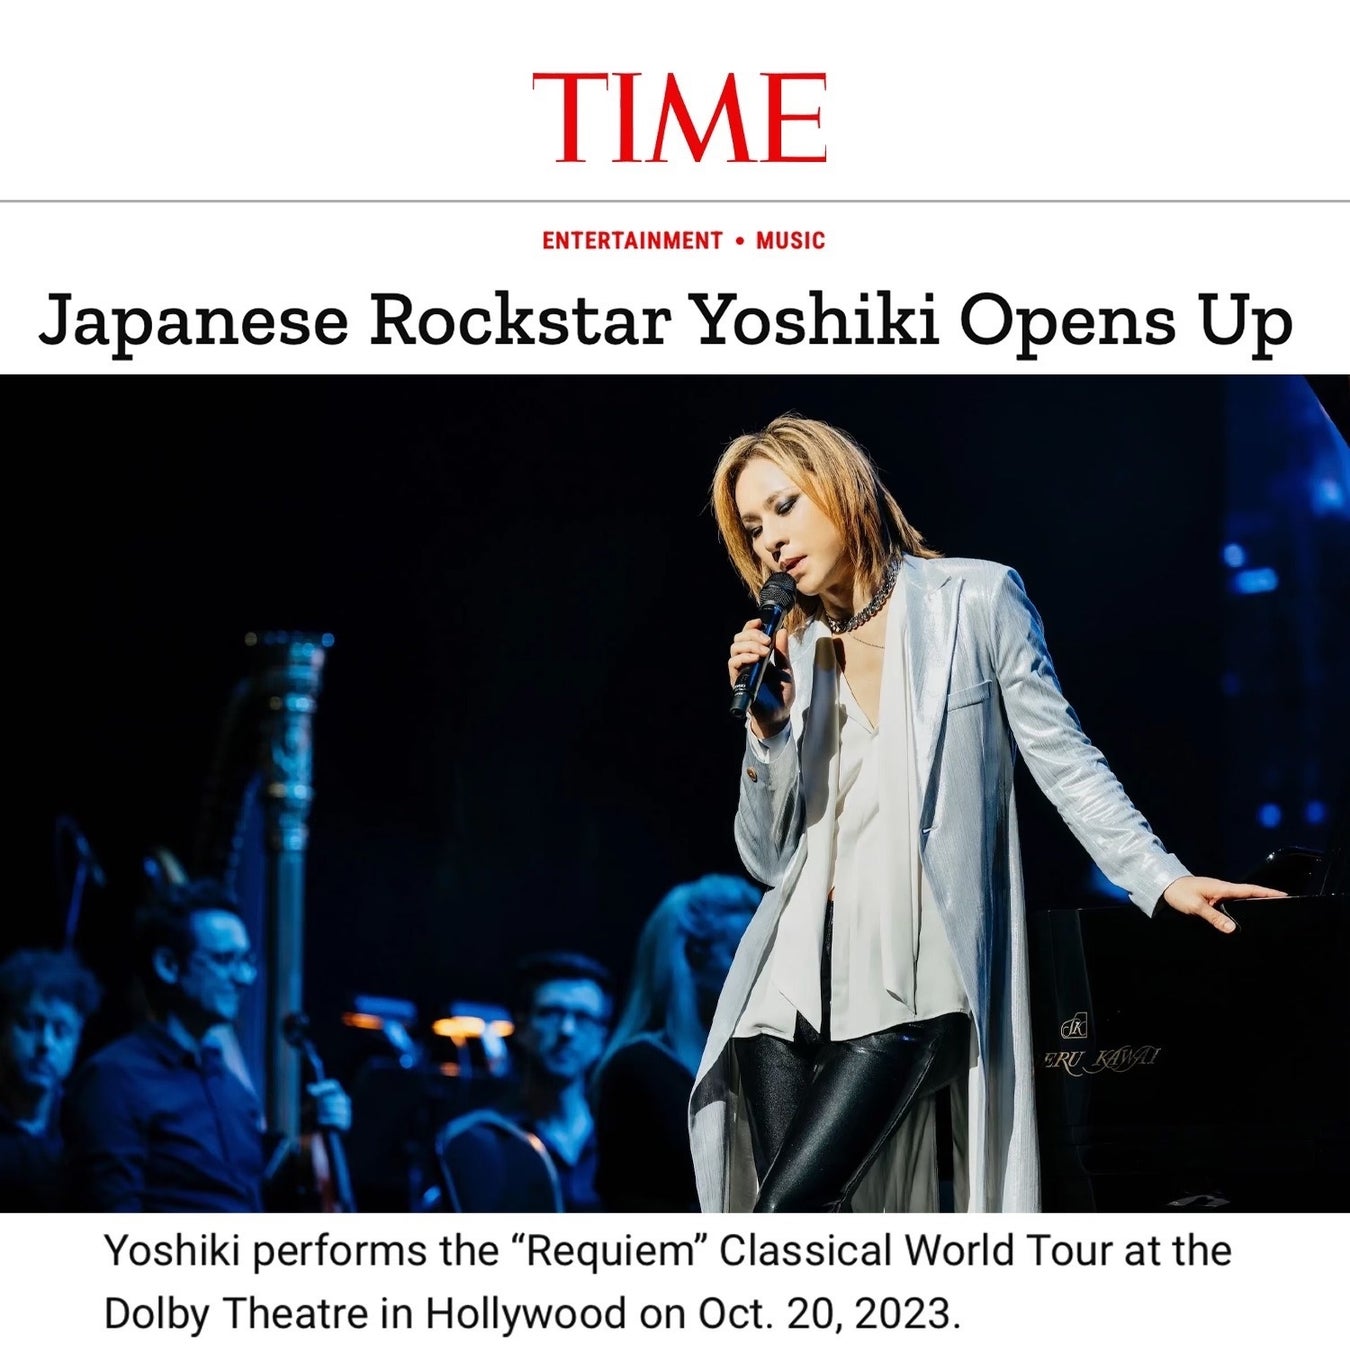 YOSHIKI 米「TIME」に登場“Yoshiki’s fame stretches beyond the borders of his home country.”のサブ画像1